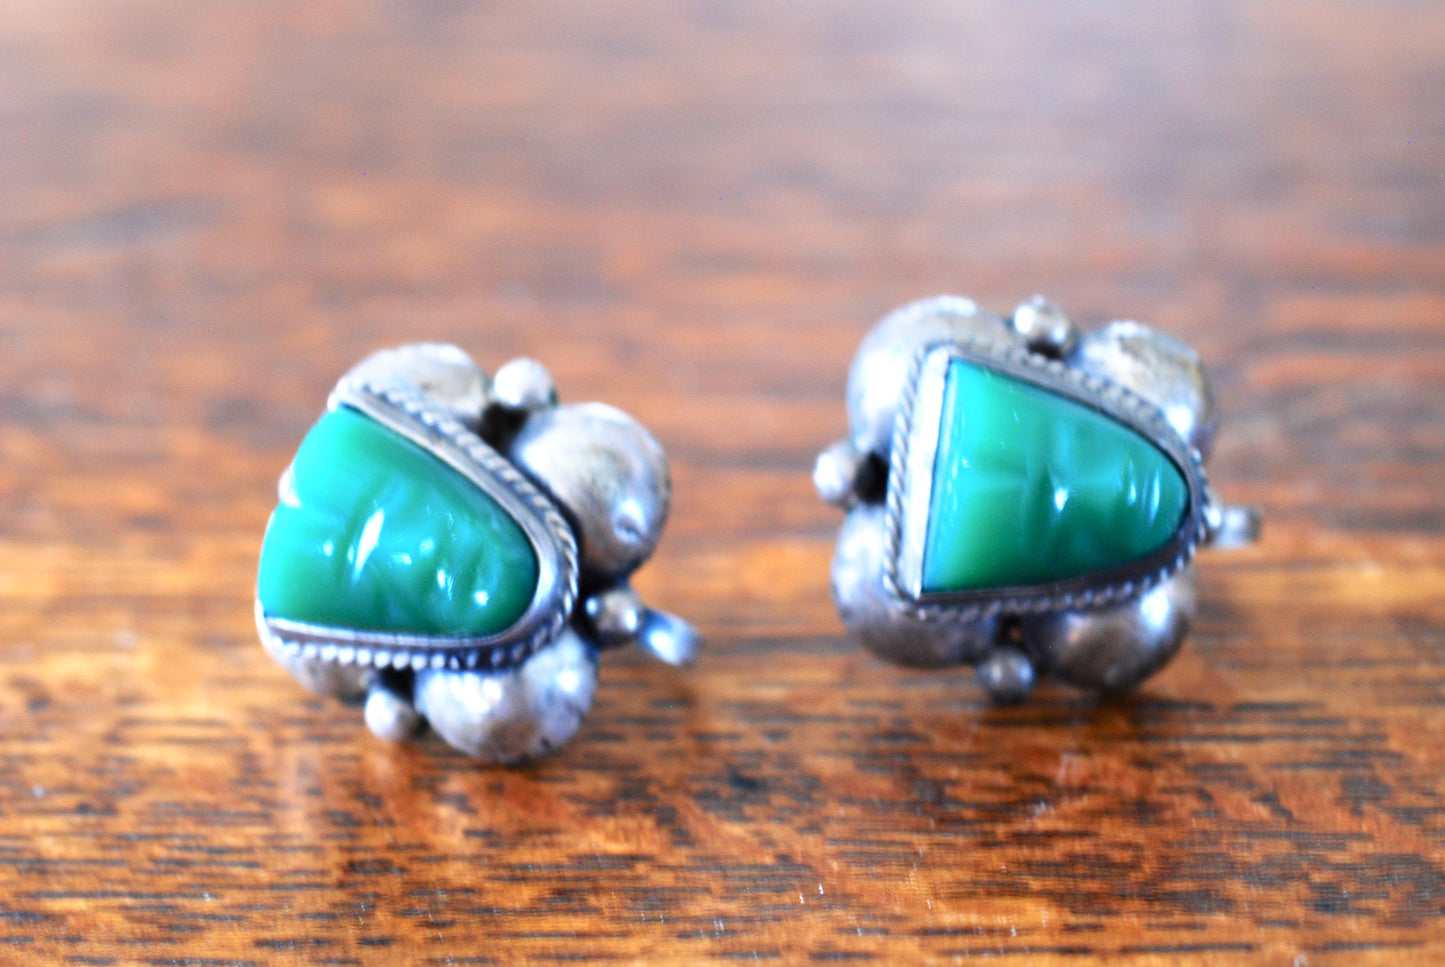 Silver and Green Onyx Warrior Face Earrings Mexico